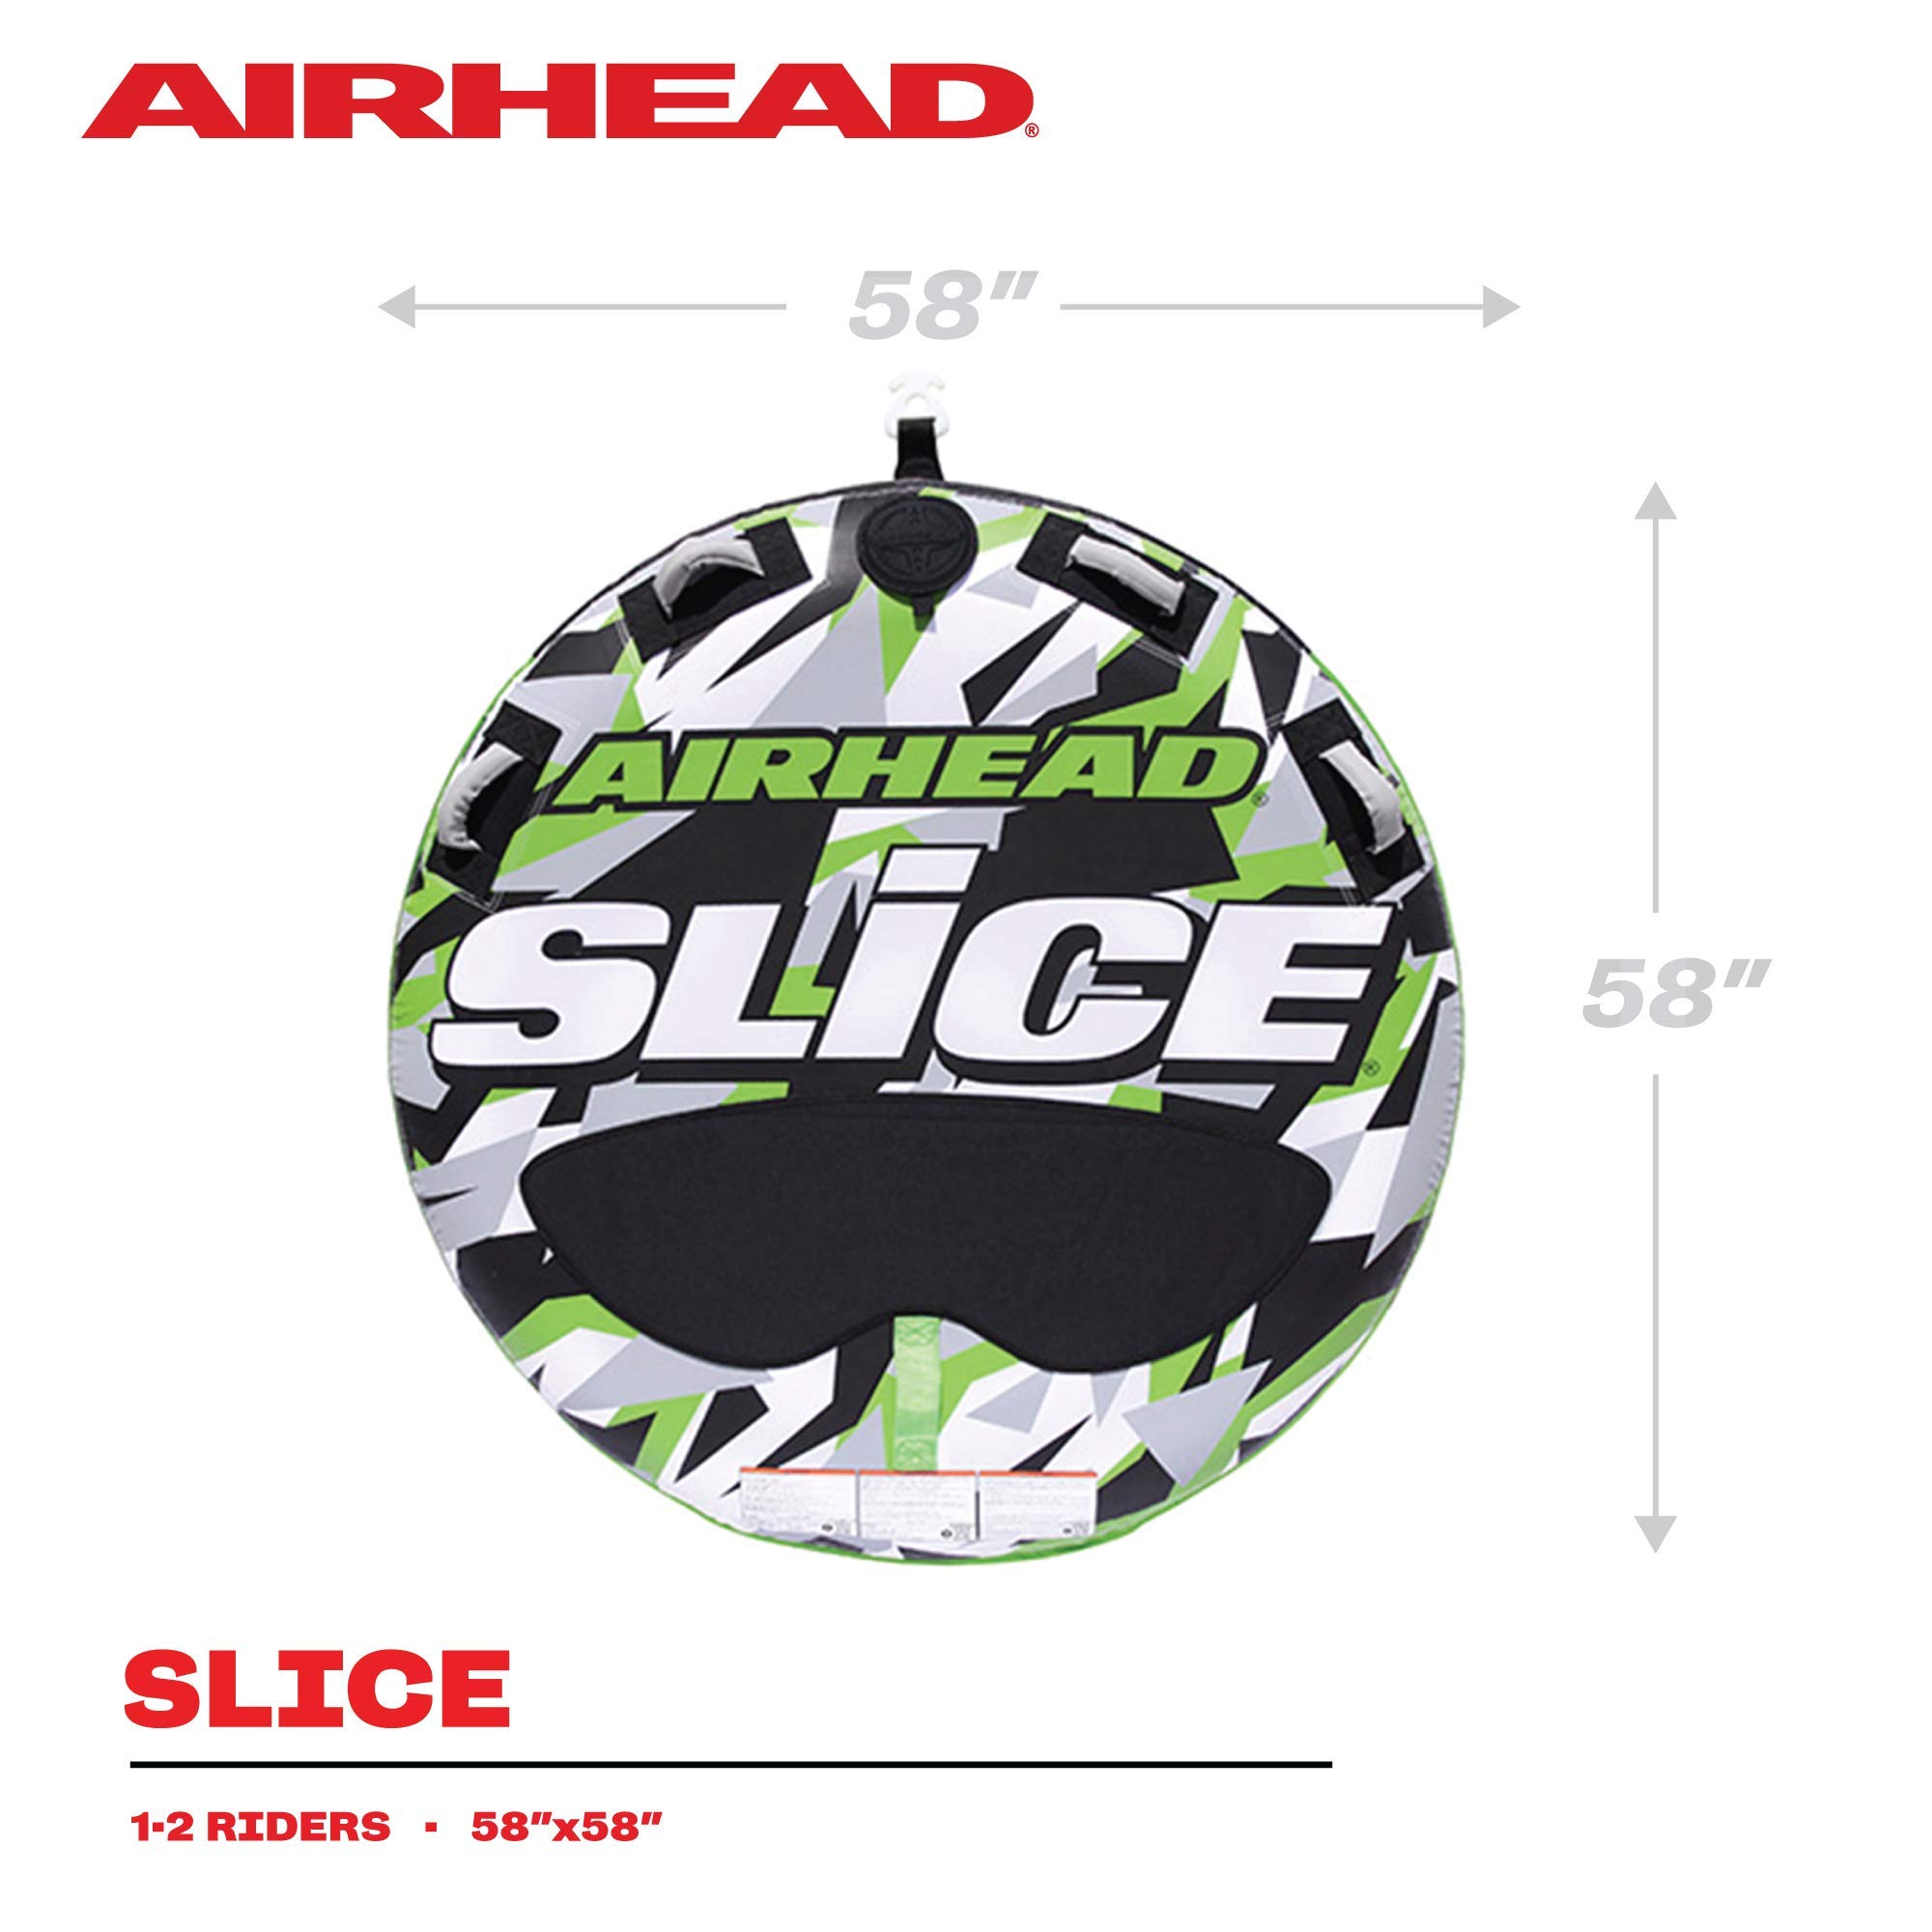 AIRHEAD Slice, Towable Tube for Boating with 1-4 Rider Options